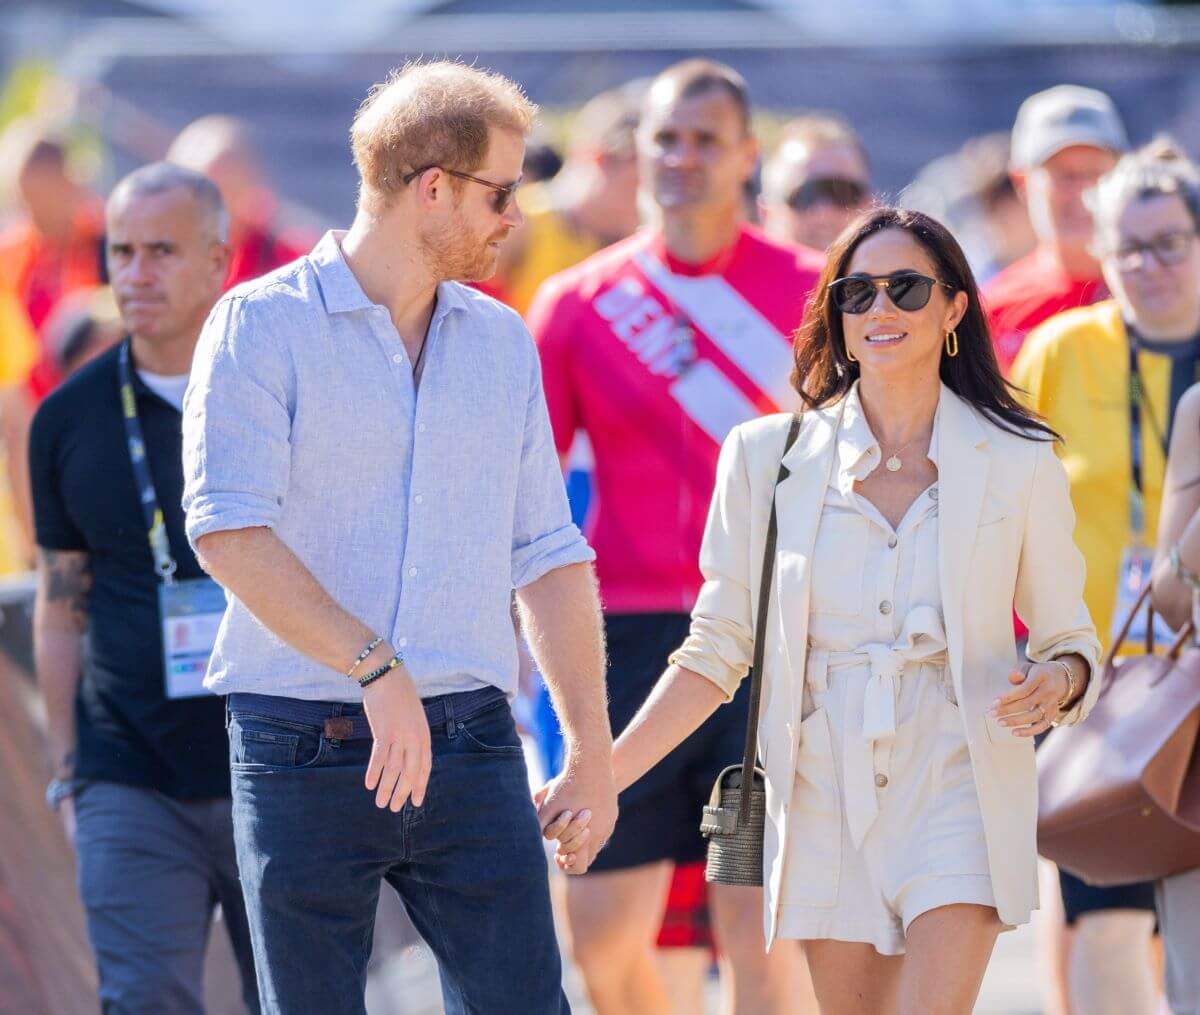 Prince Harry and Meghan Markle arrive for the cycling medal ceremony at the 6th Invictus Games